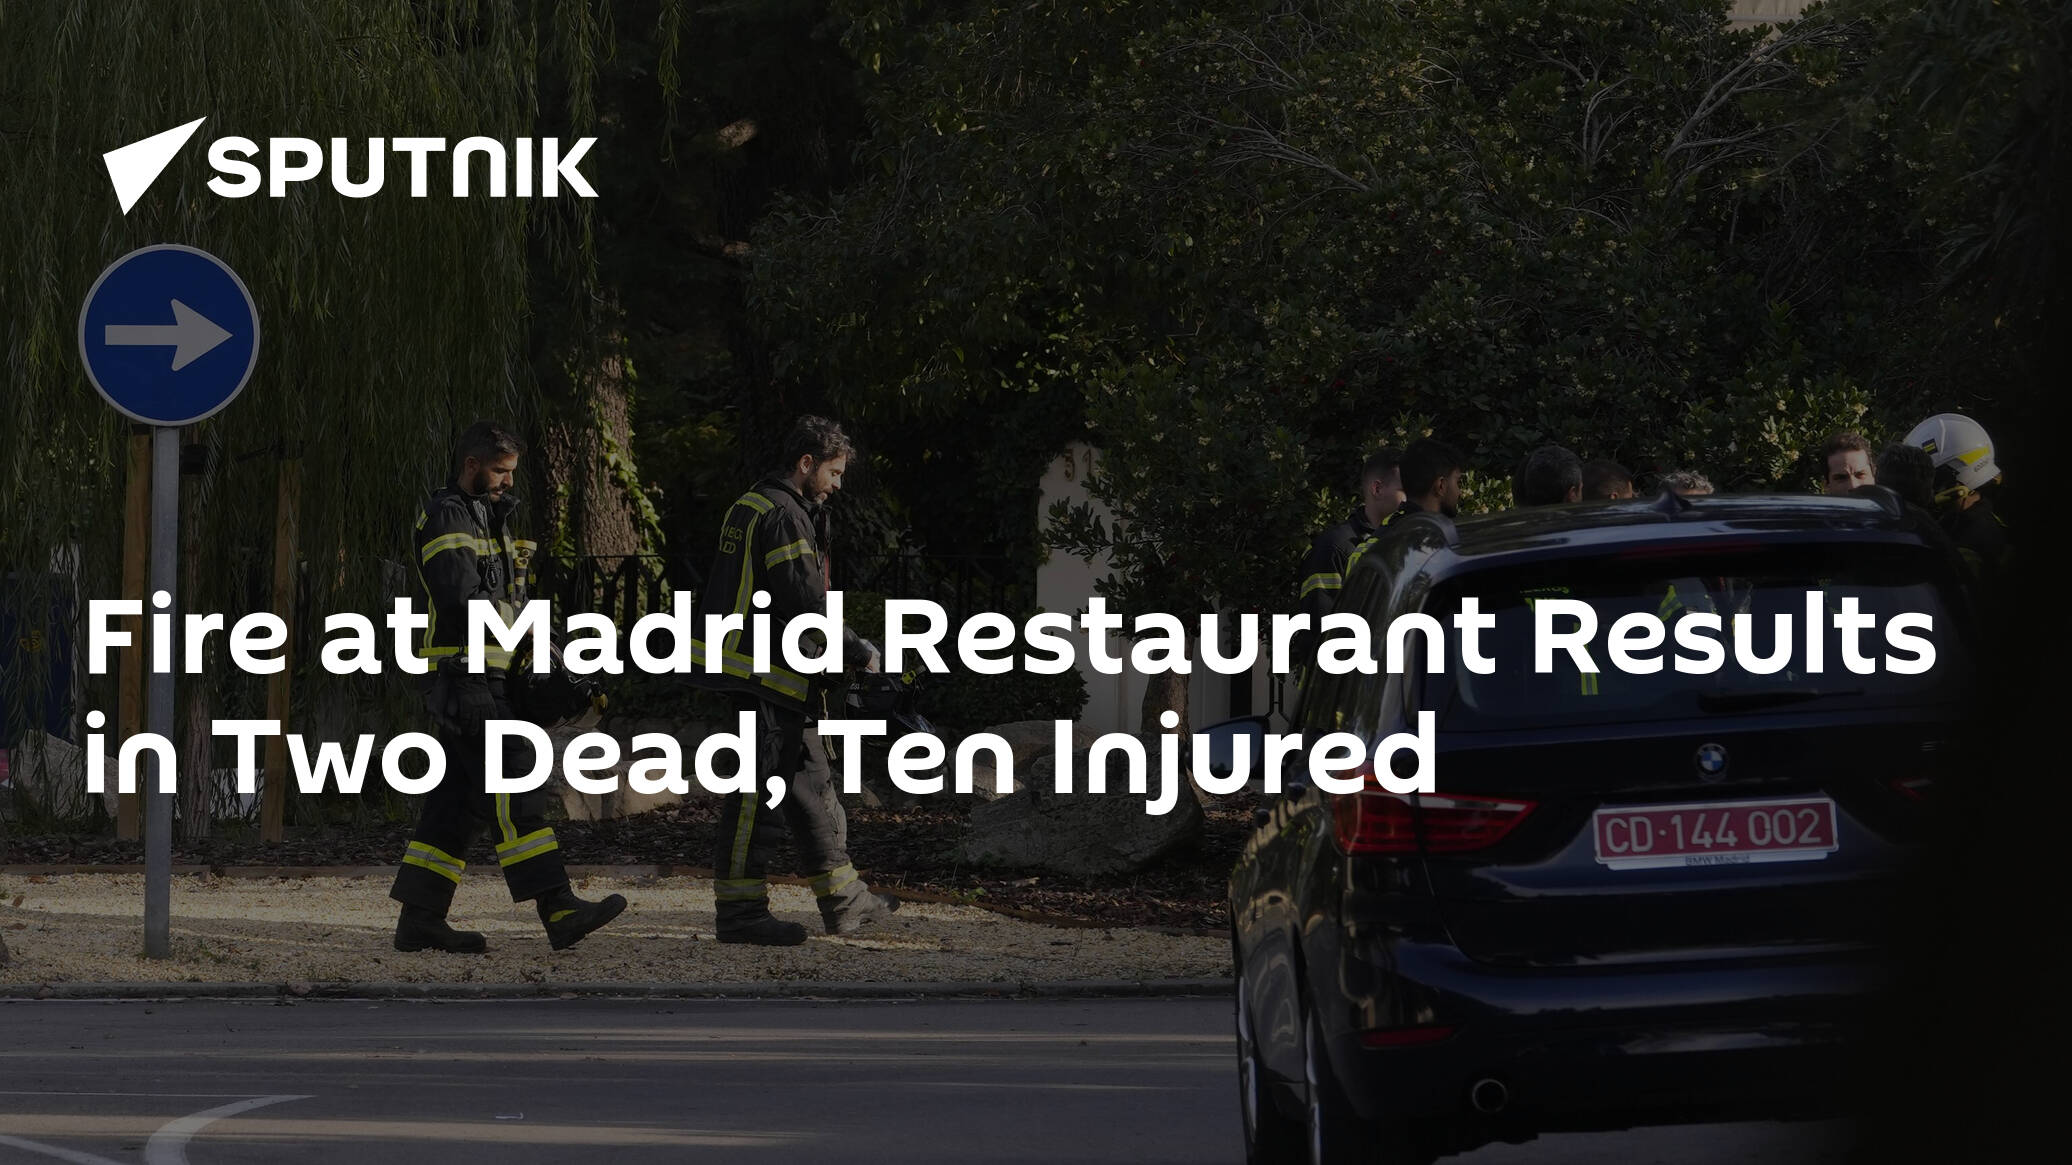 Fire at Madrid Restaurant Results in Two Dead, Ten Injured